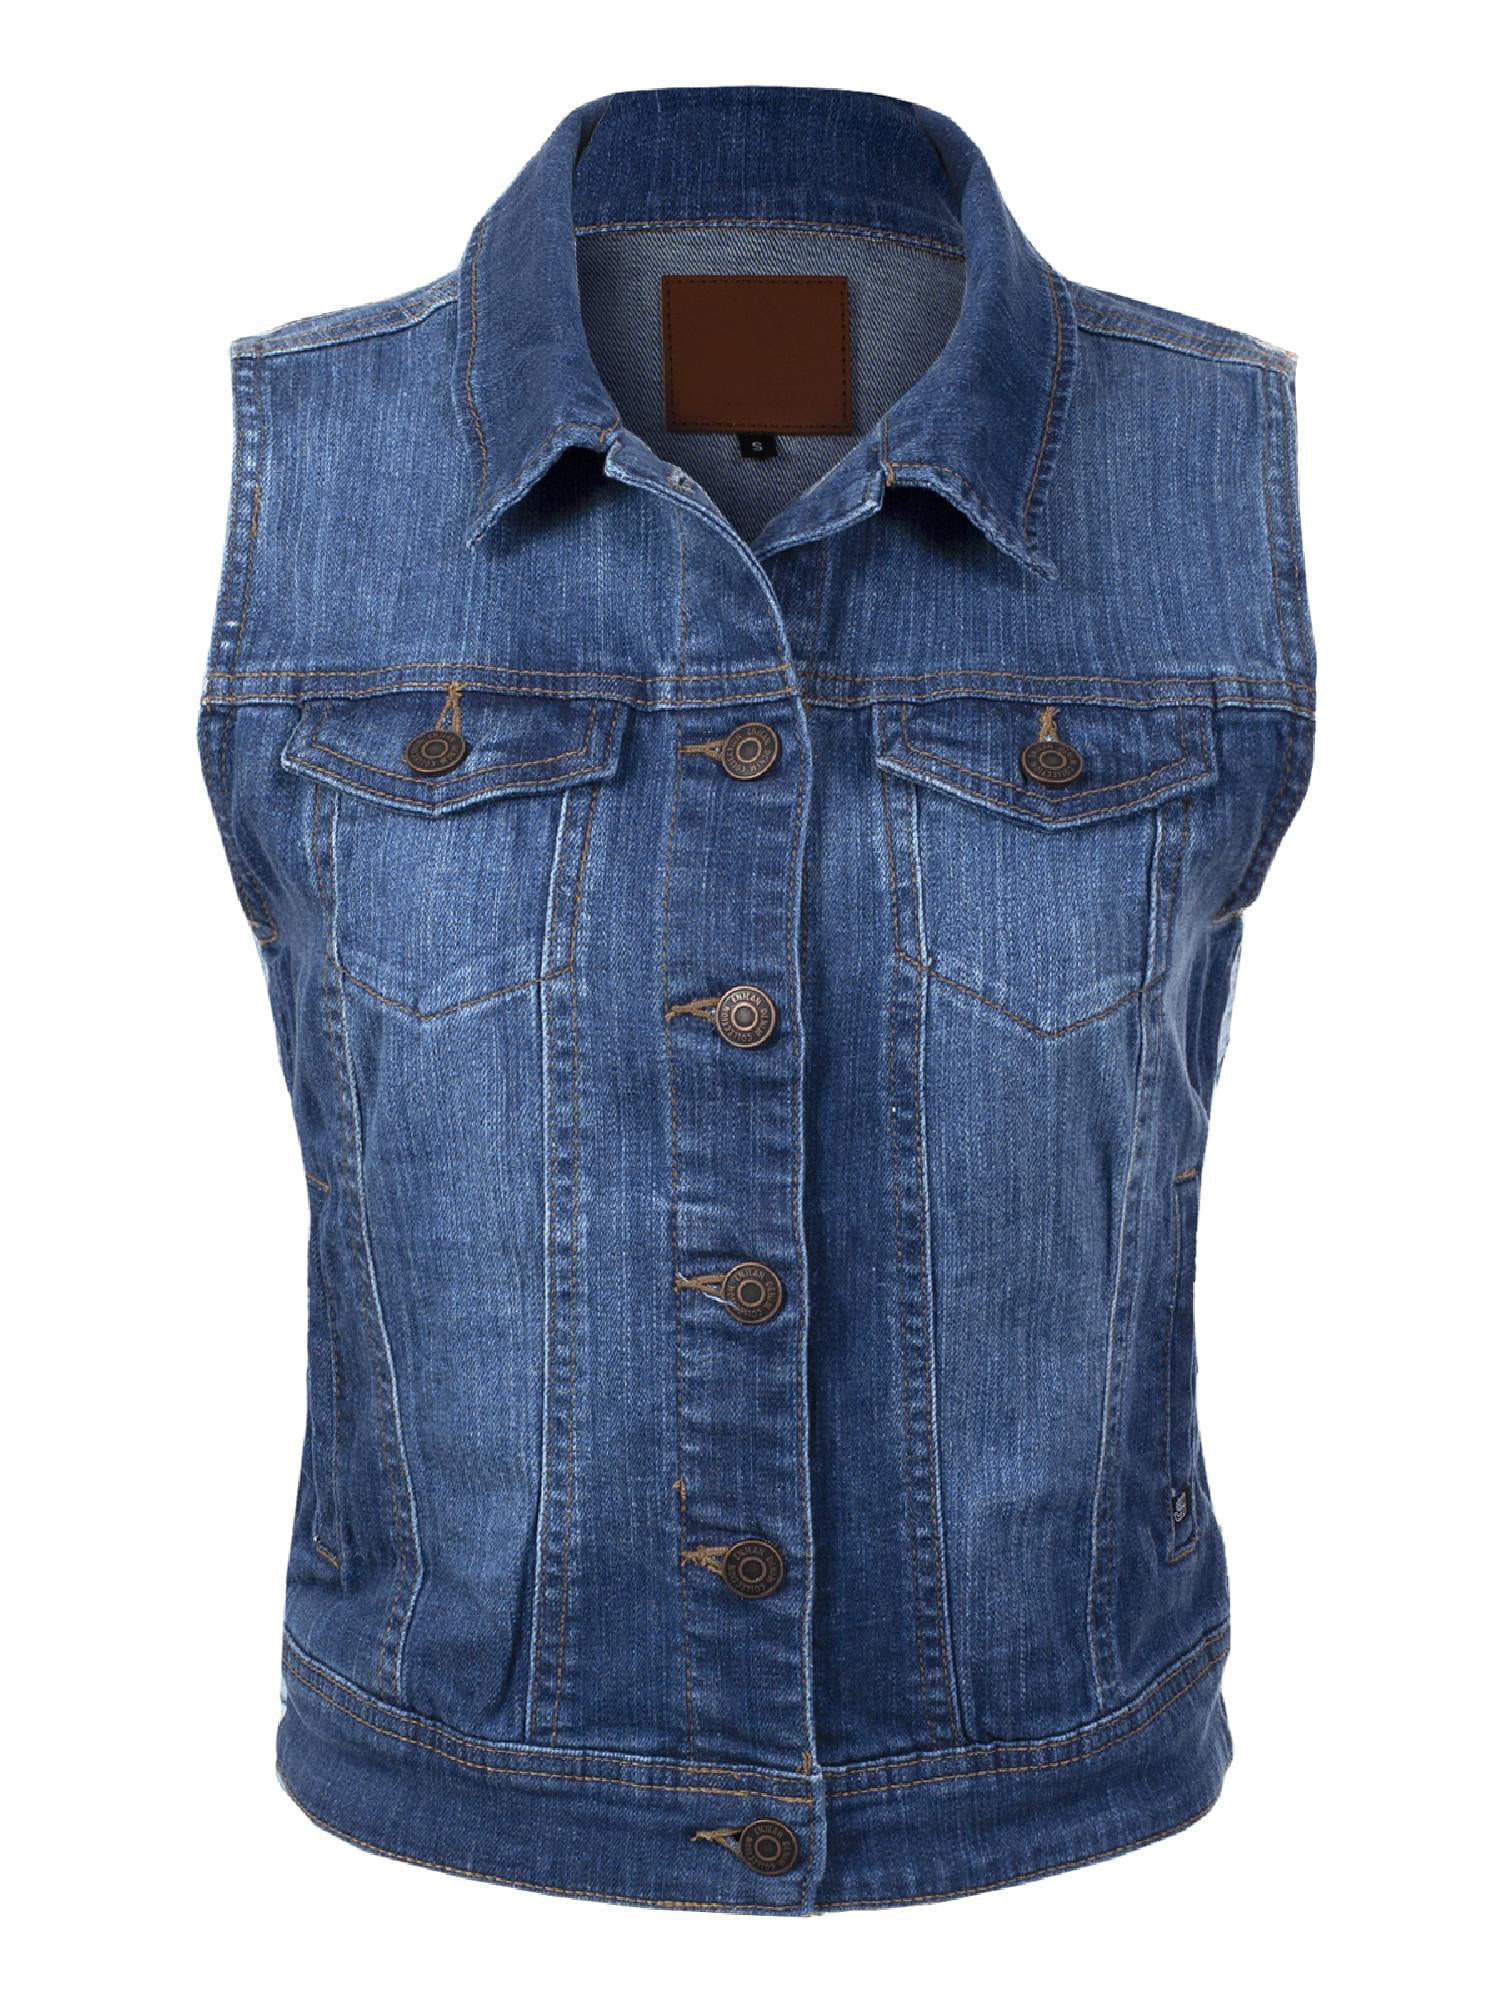 Design by Olivia Womens Sleeveless Distressed Cropped Stone Washed Classic Jean Jacket Vest 